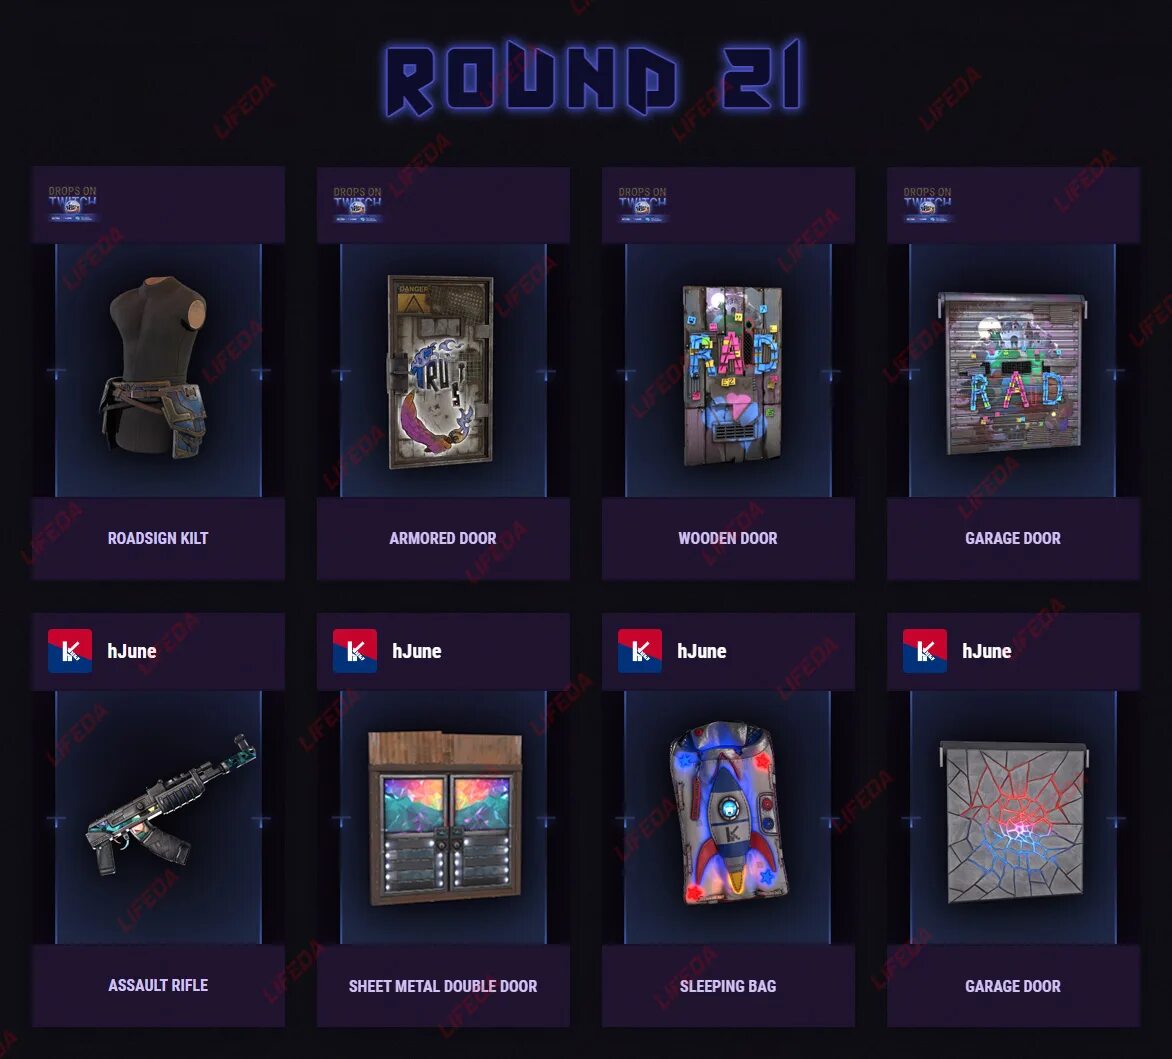 21 Round twitch Drops Rust. Твич дроп раст скины. Твич Дропс 2023. Твич дроп раст 2023. Твич дропс раст 2022